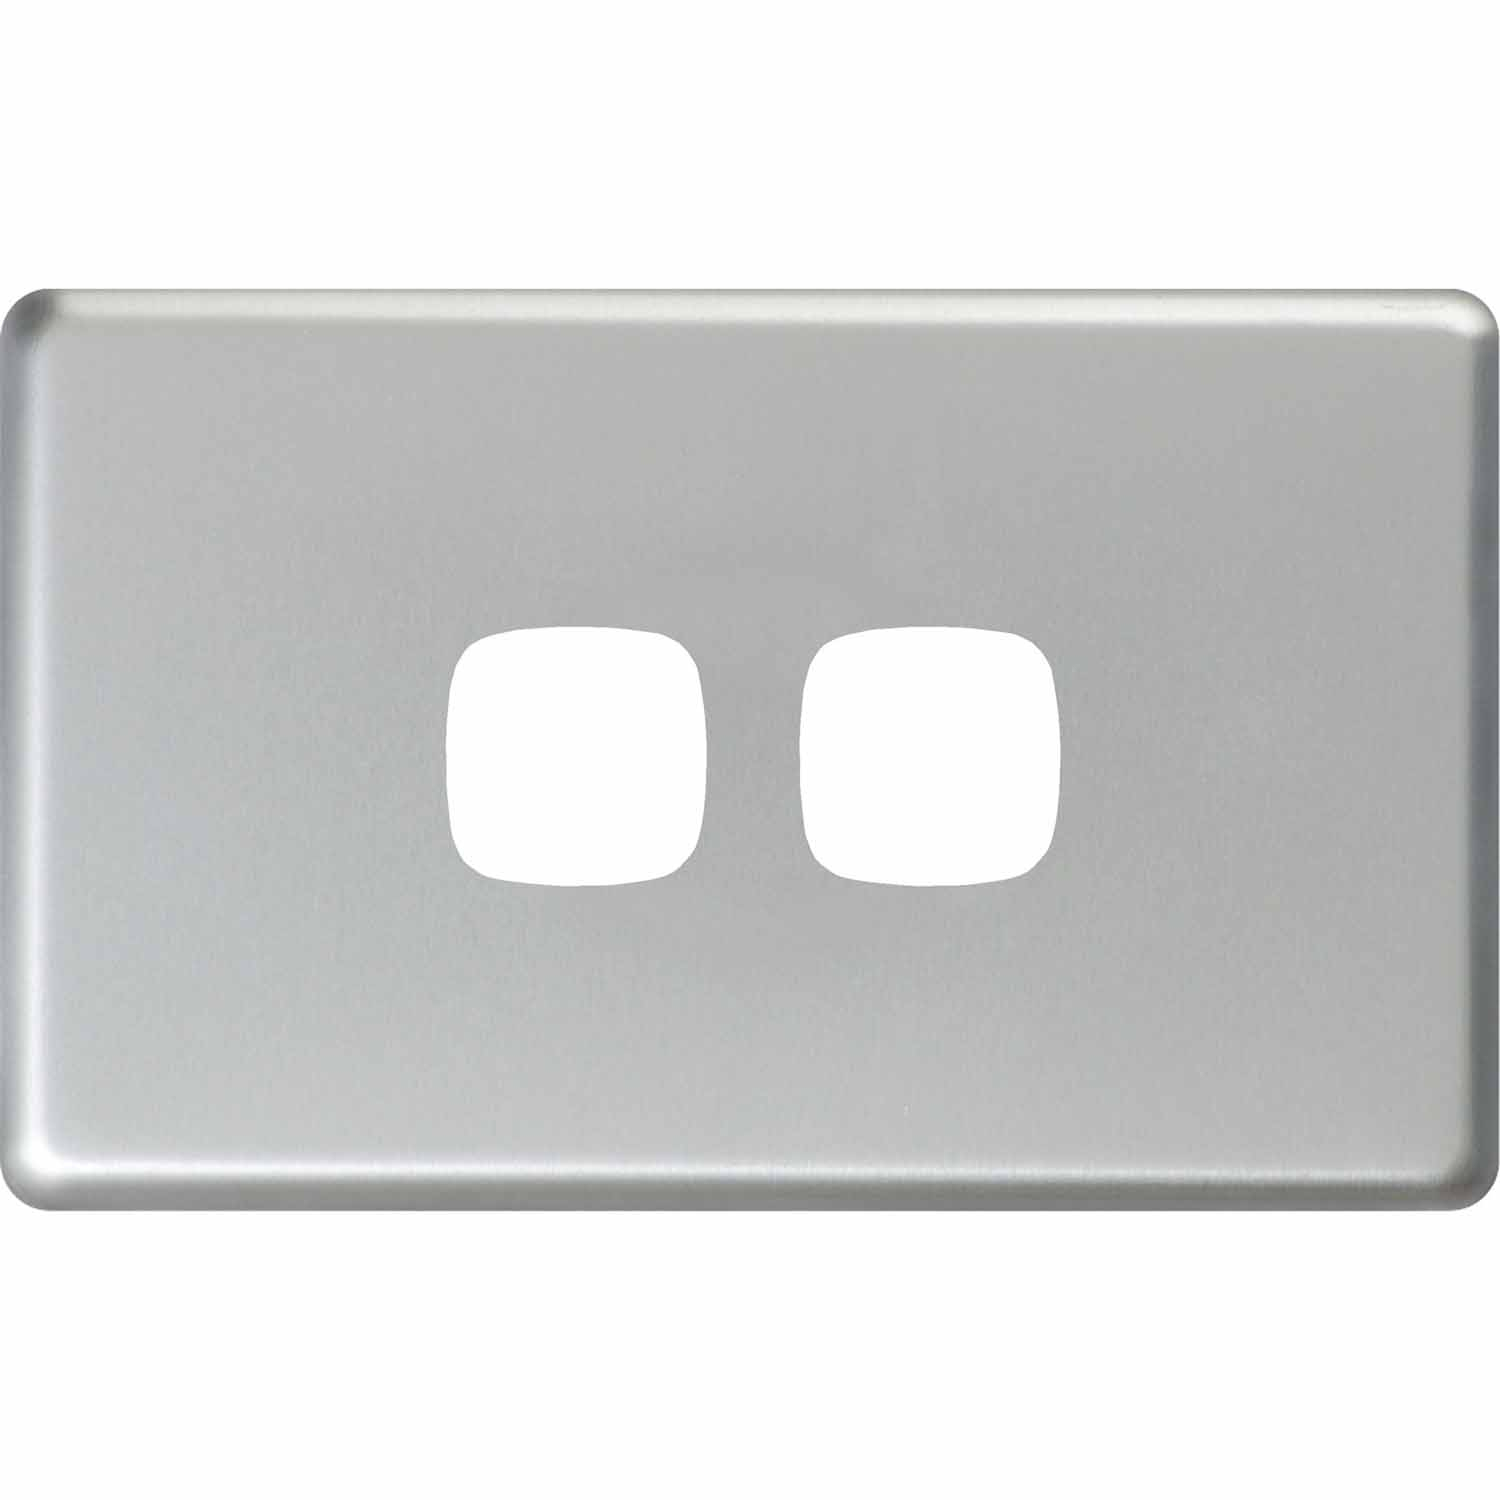 Excel Excel 1 Gang Cover Plate H 73mm L117mm Matt Silver for sizing 1500 X 1500